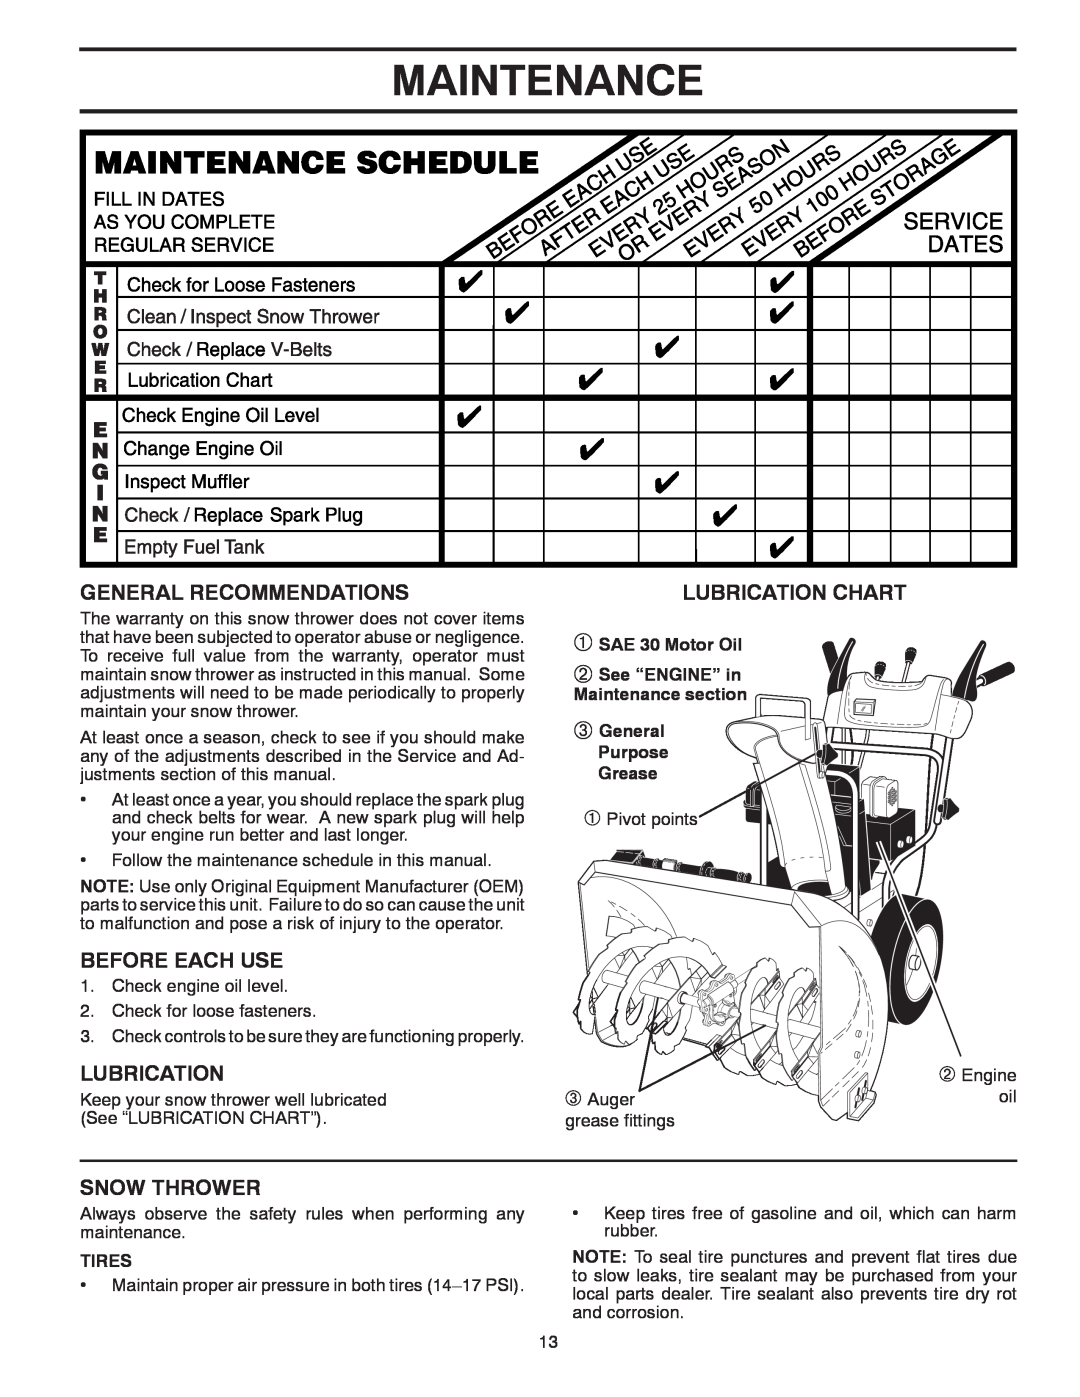 Poulan 96192003801, 436001 Maintenance, General Recommendations, Before Each Use, Snow Thrower, Lubrication Chart 